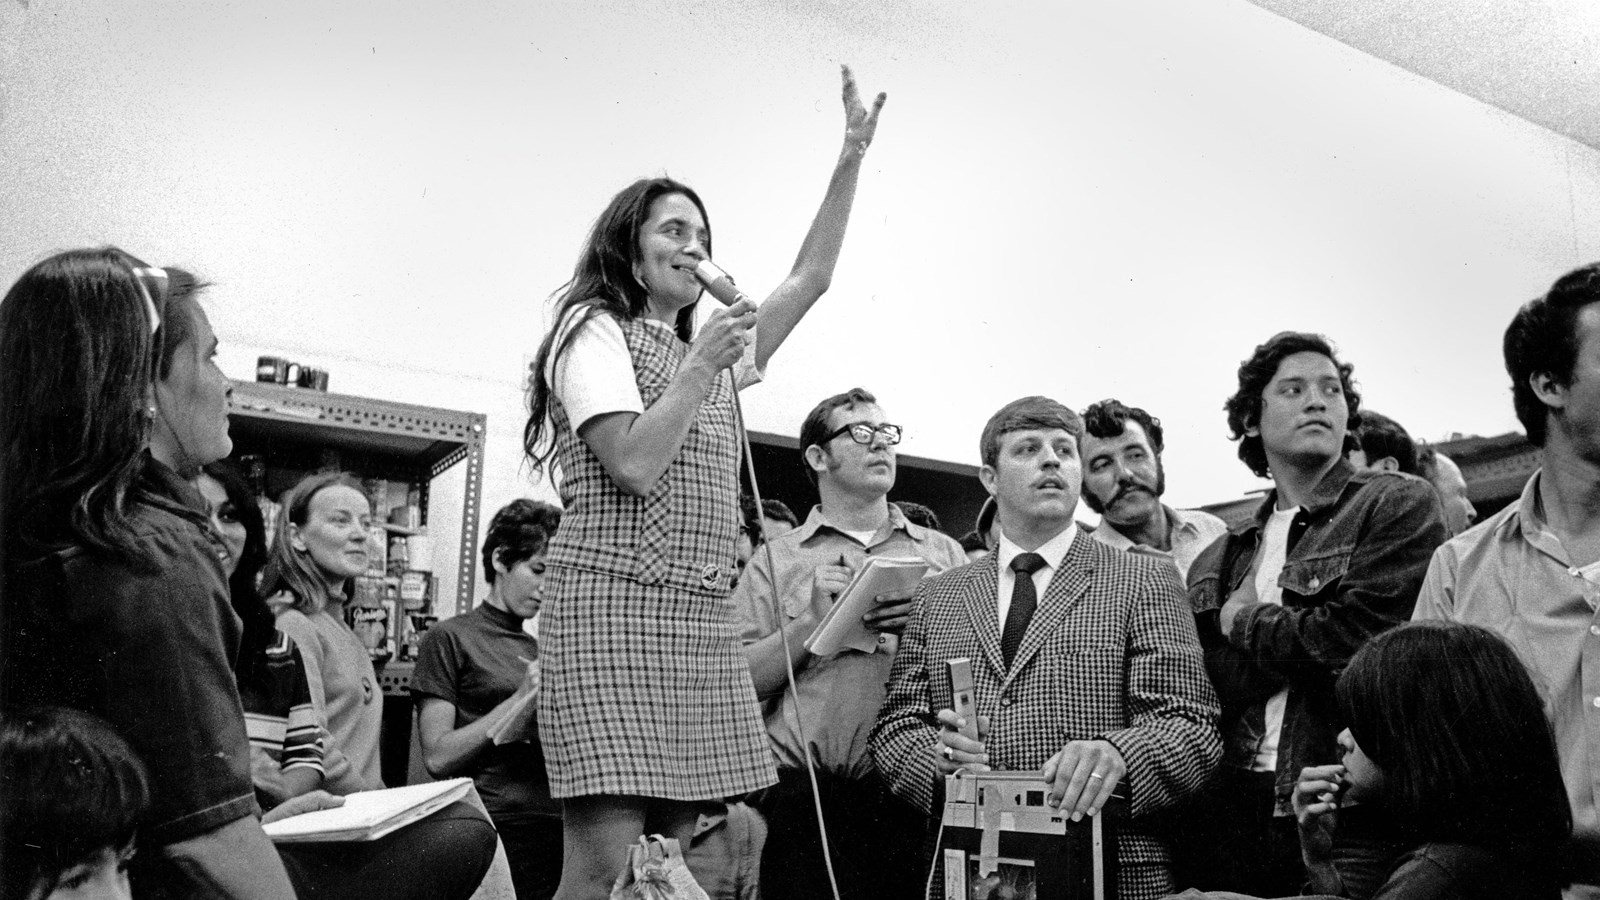 A woman stands on a chair, arm raised, speaking into a microphone while surrounded by people